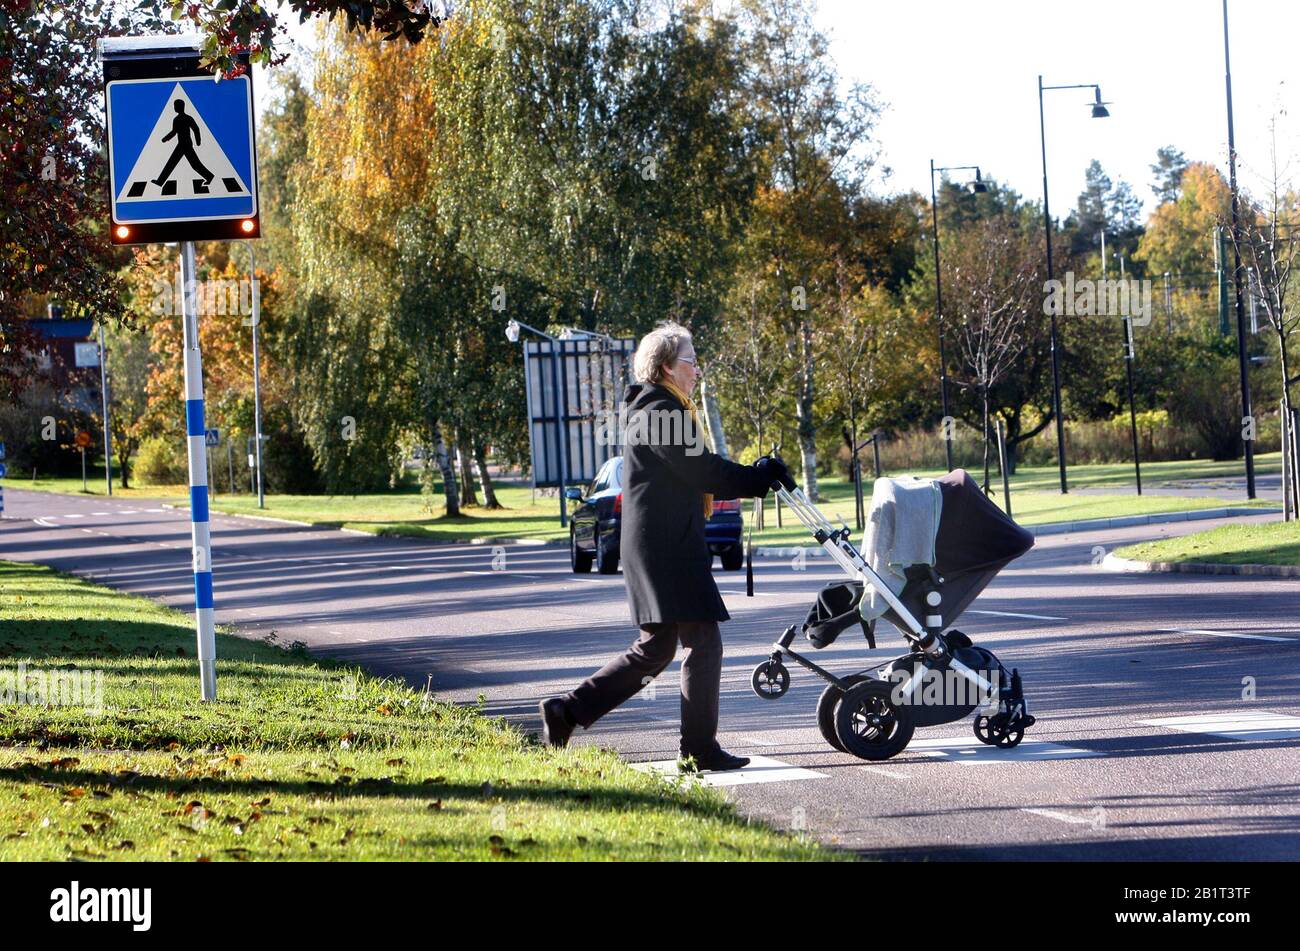 Page 3 - Trafik High Resolution Stock Photography and Images - Alamy